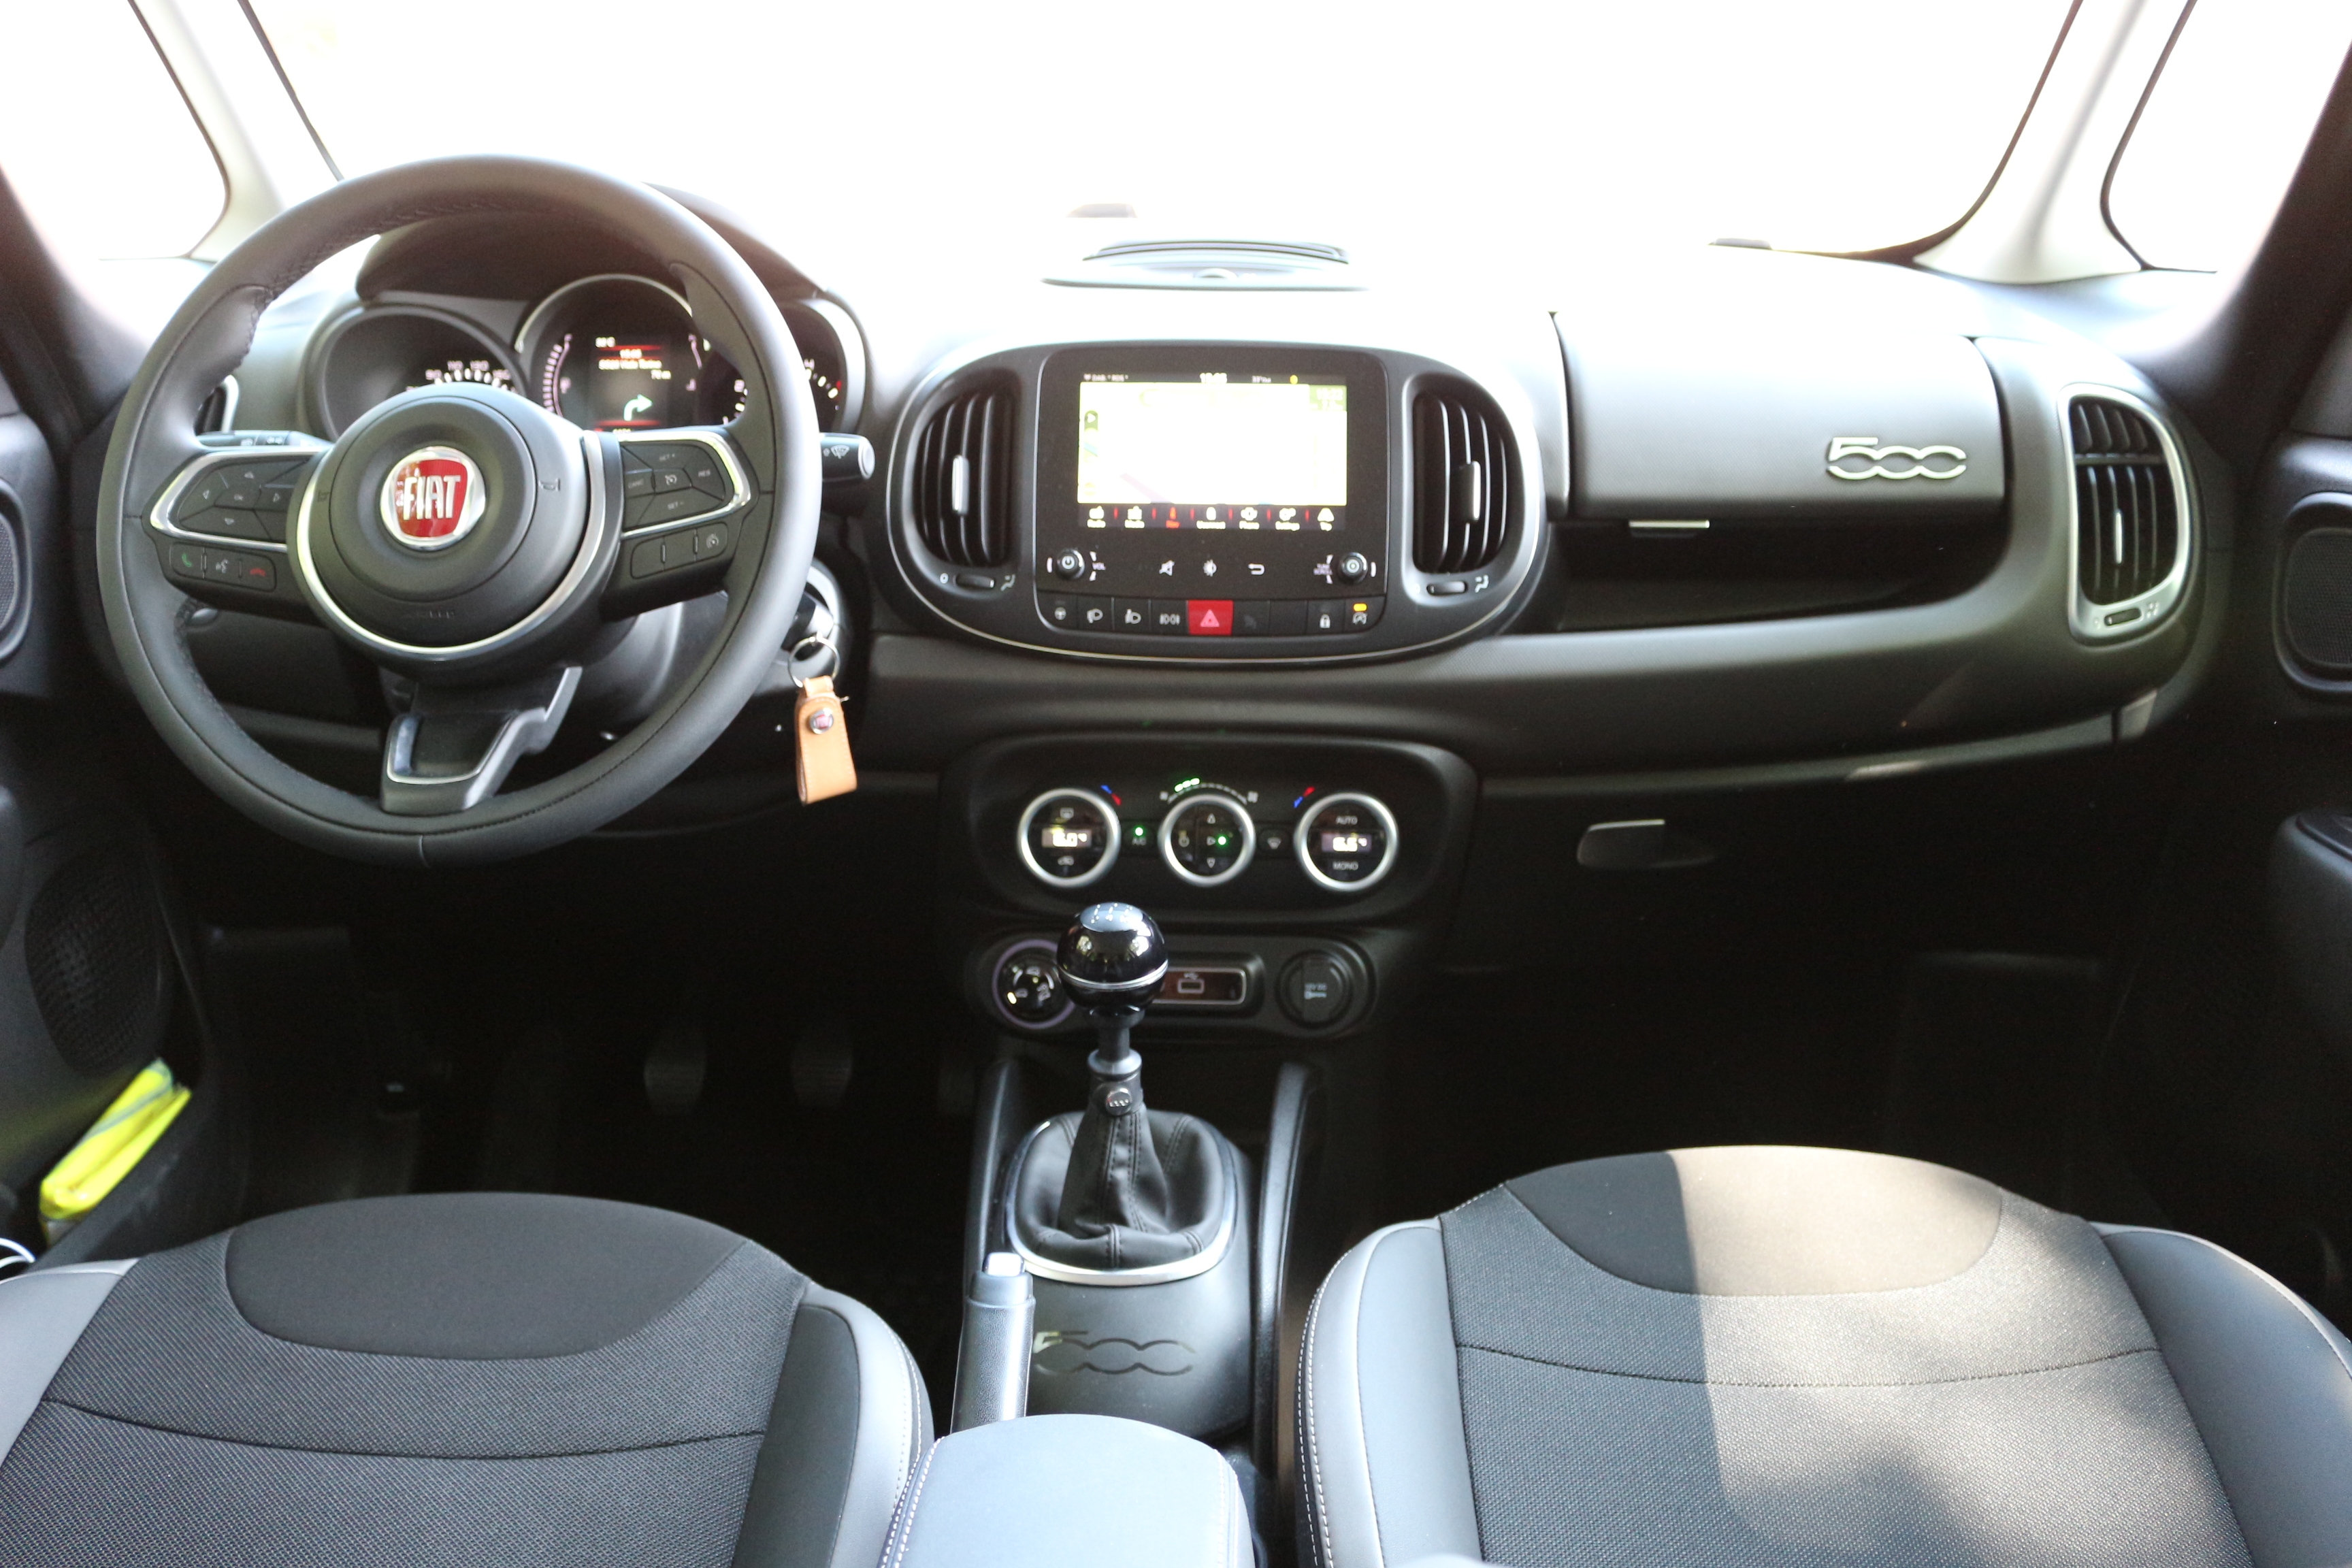 Fiat 500L mod specifications